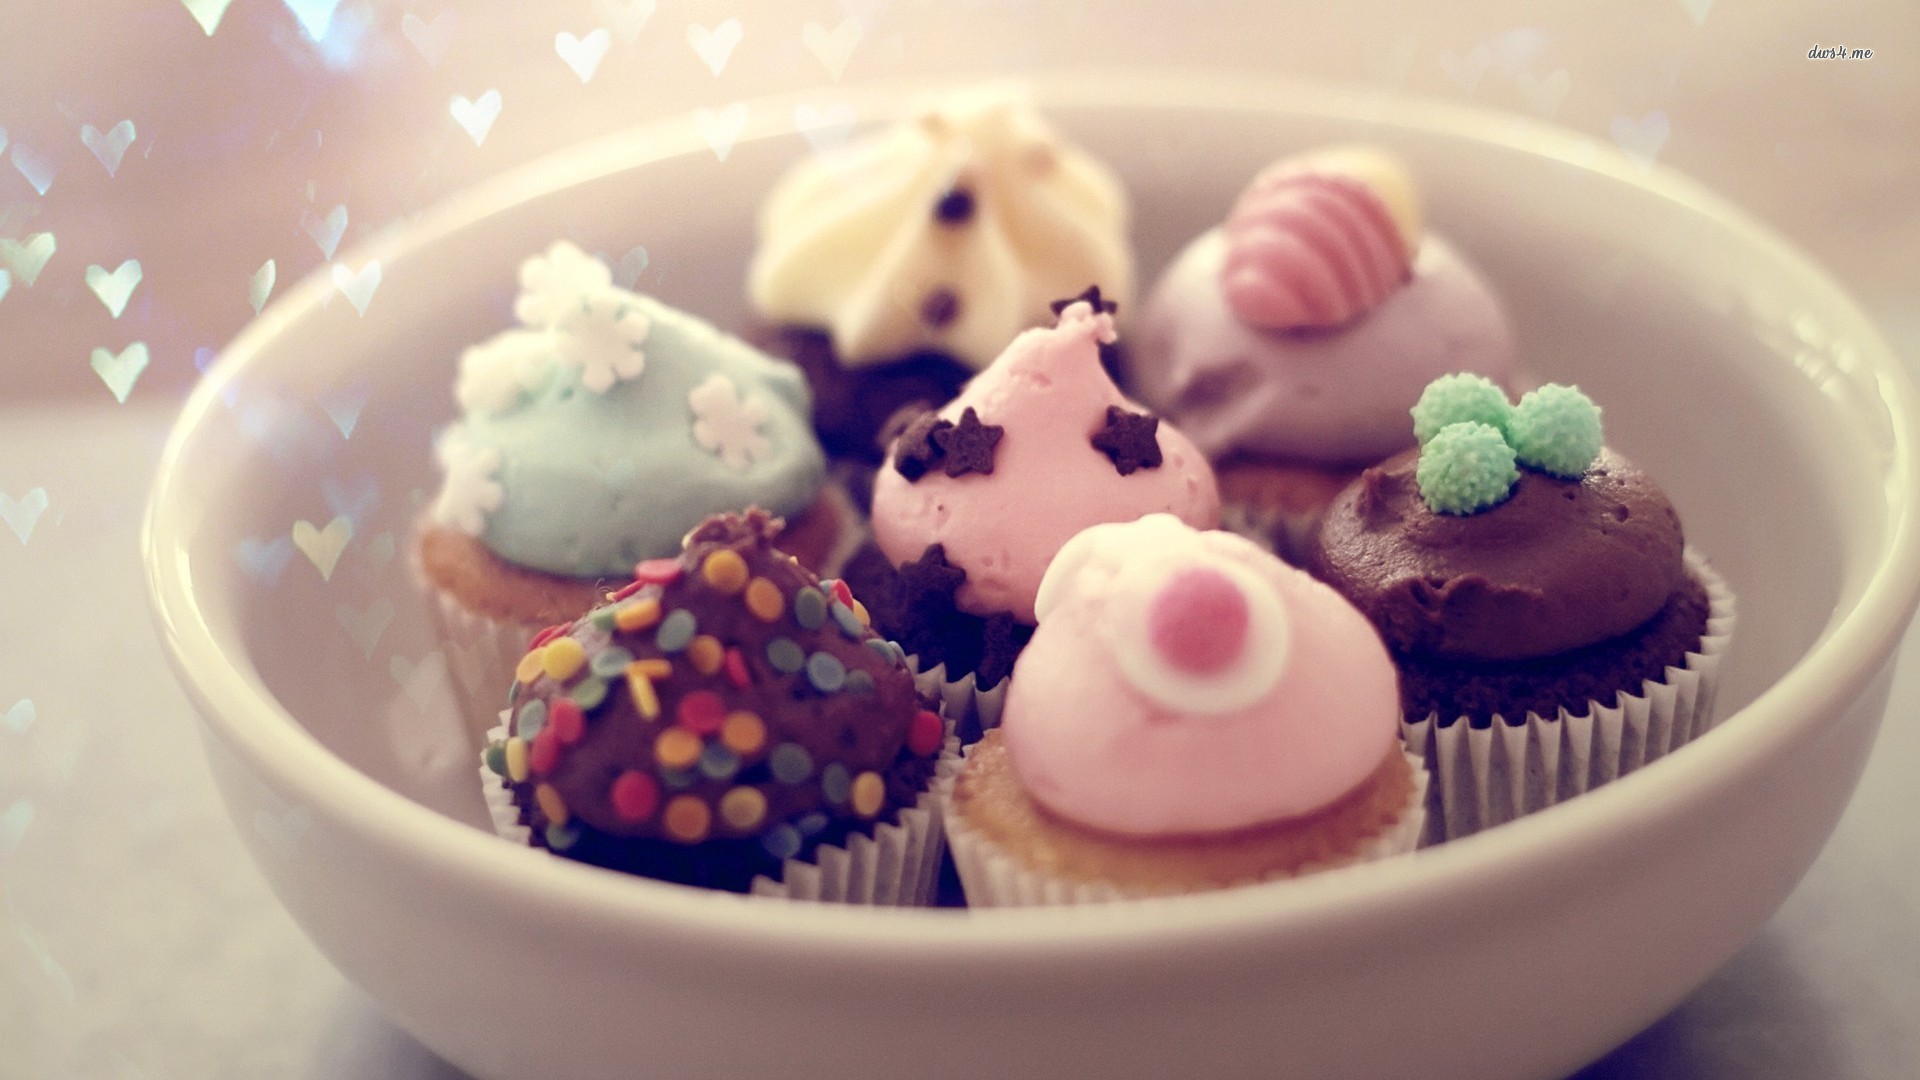 Cupcakes wallpaper - Photography wallpapers